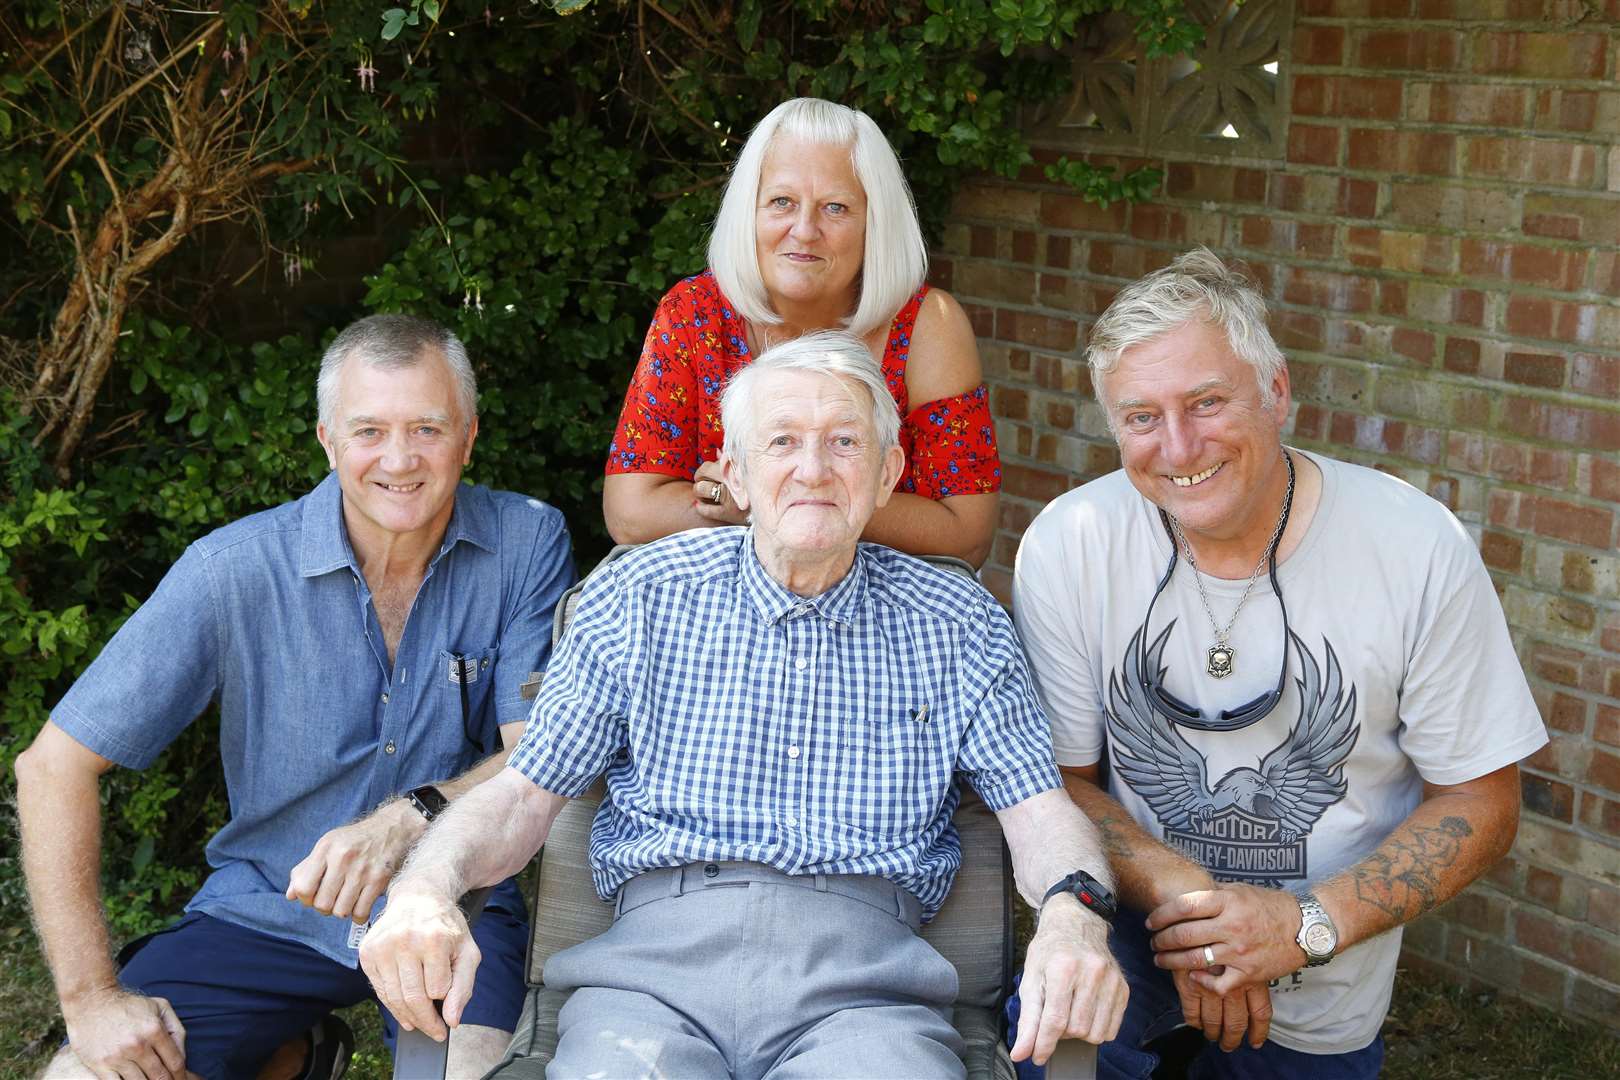 Dennis Whyard with his children Mick Whyard, Janice Whyard & Robert Whyard